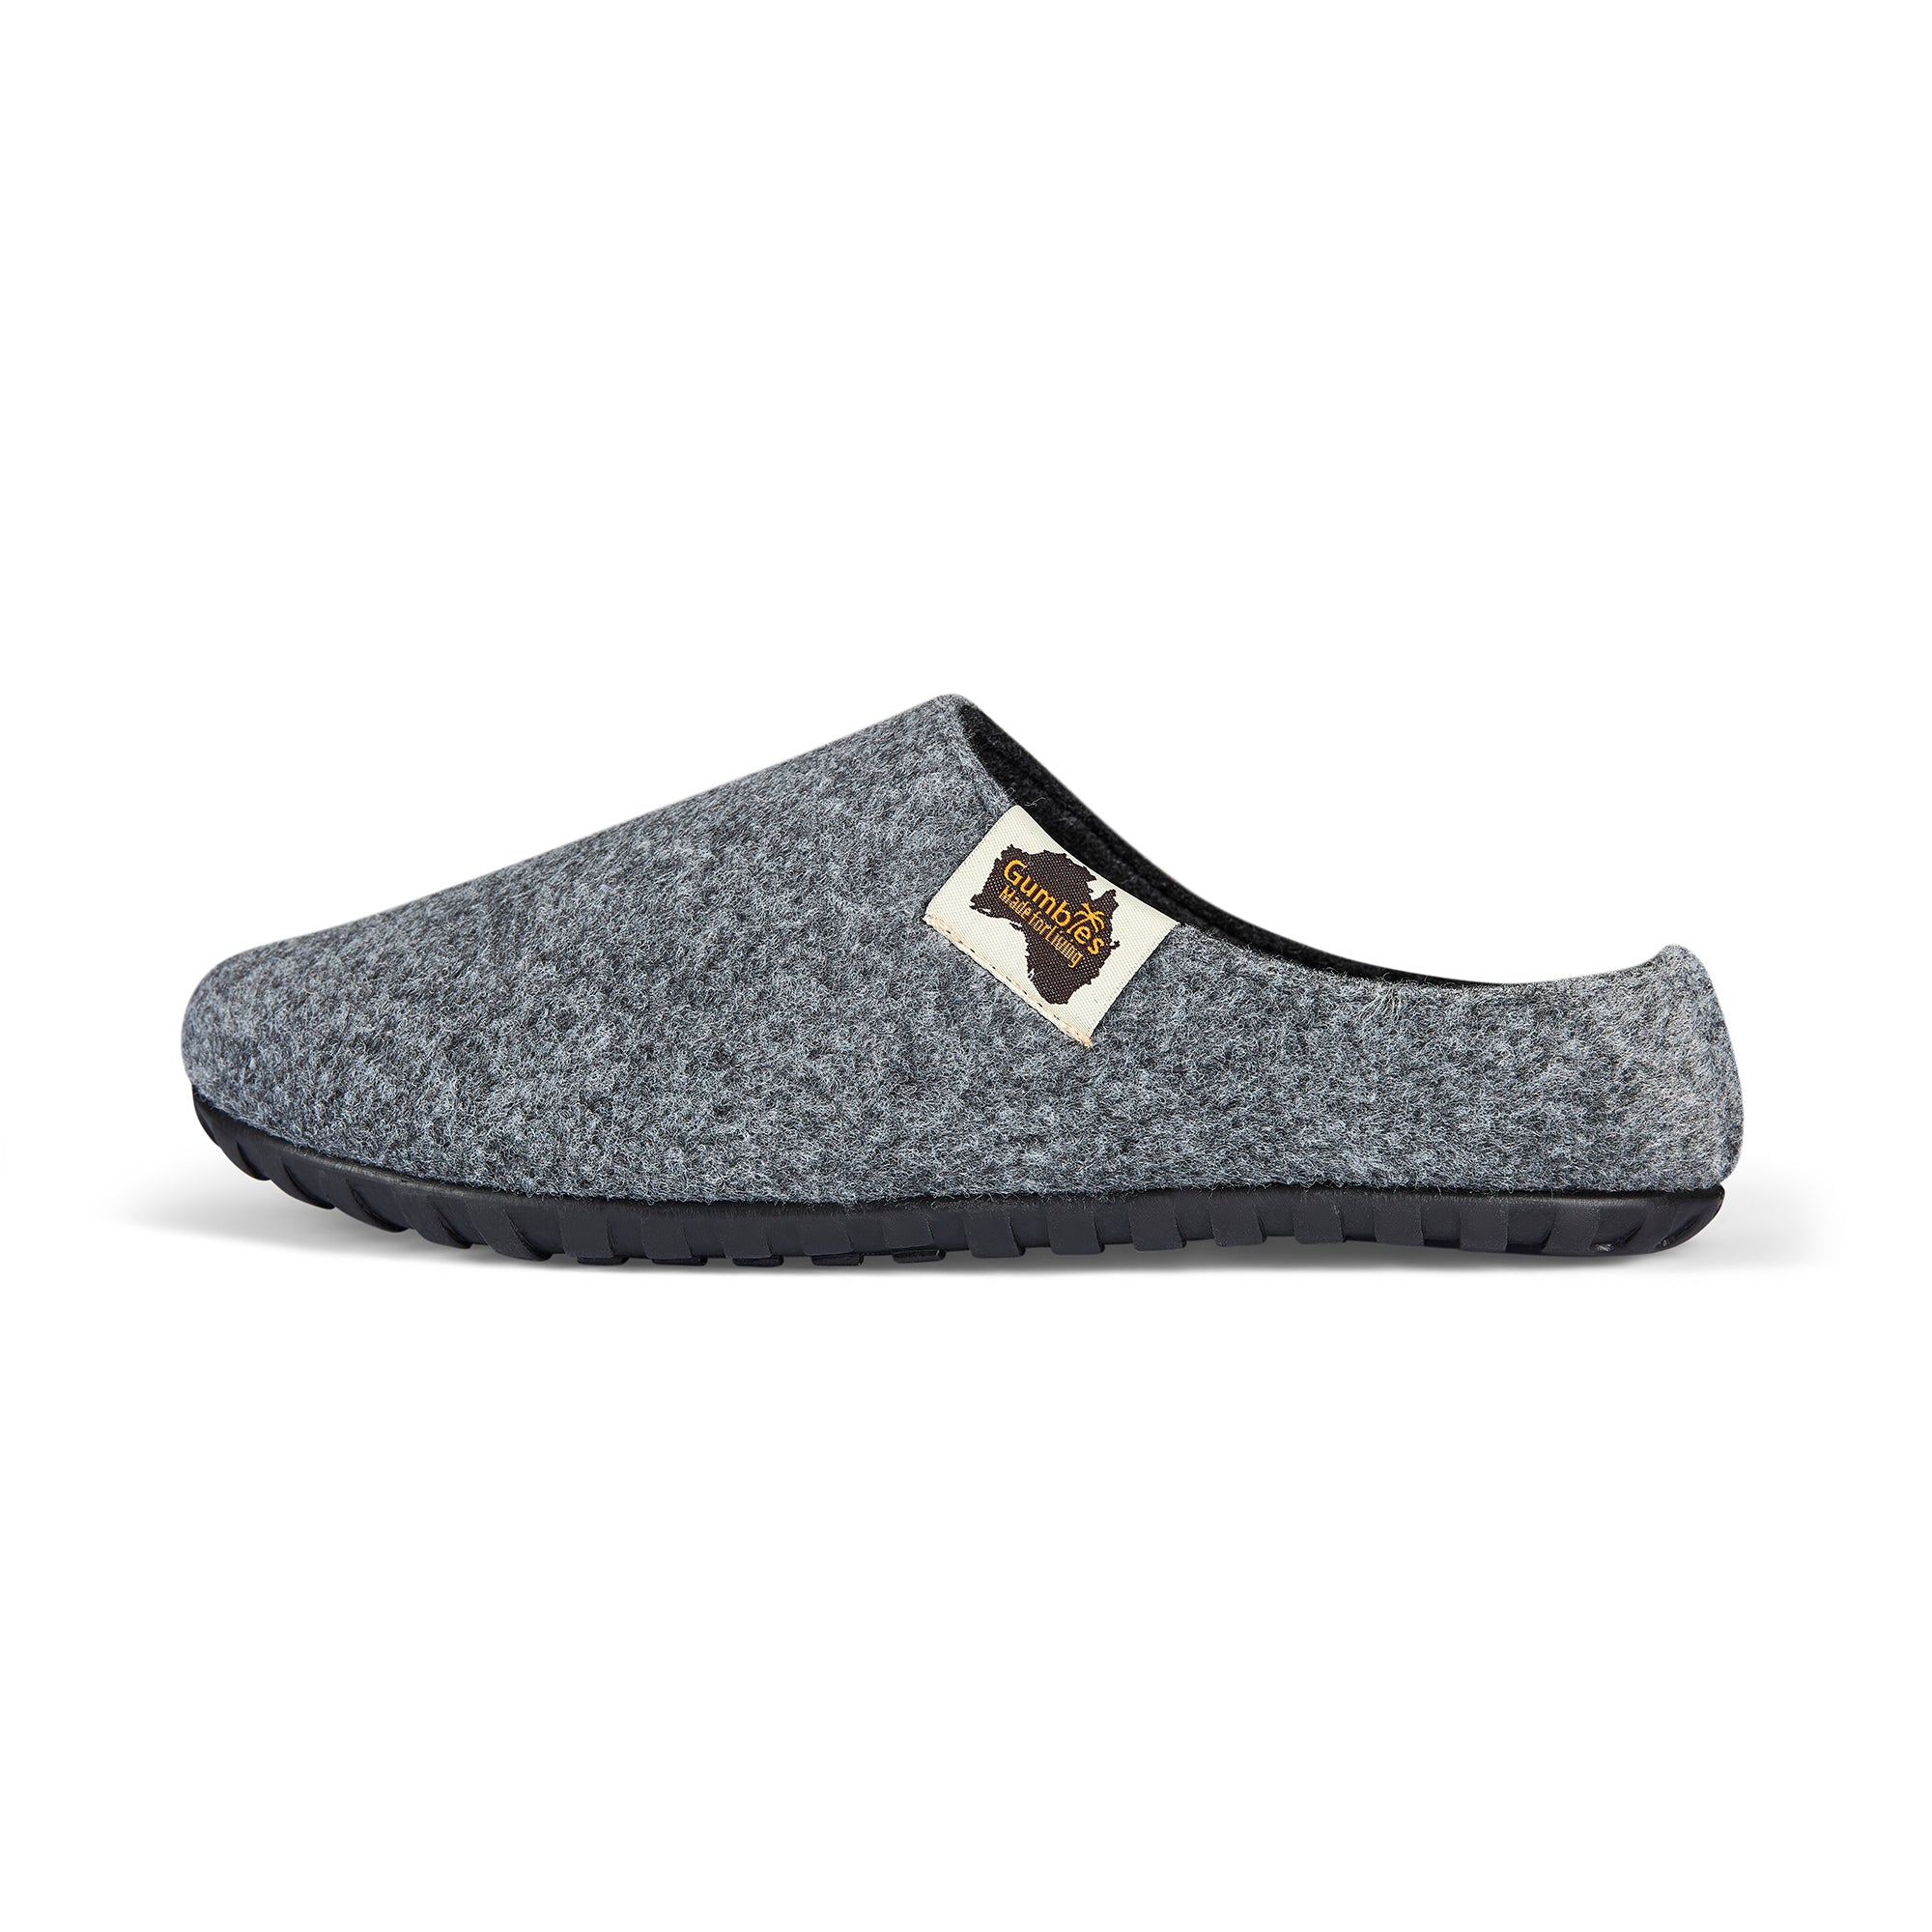 Outback Slippers - Men's - Grey & Charcoal